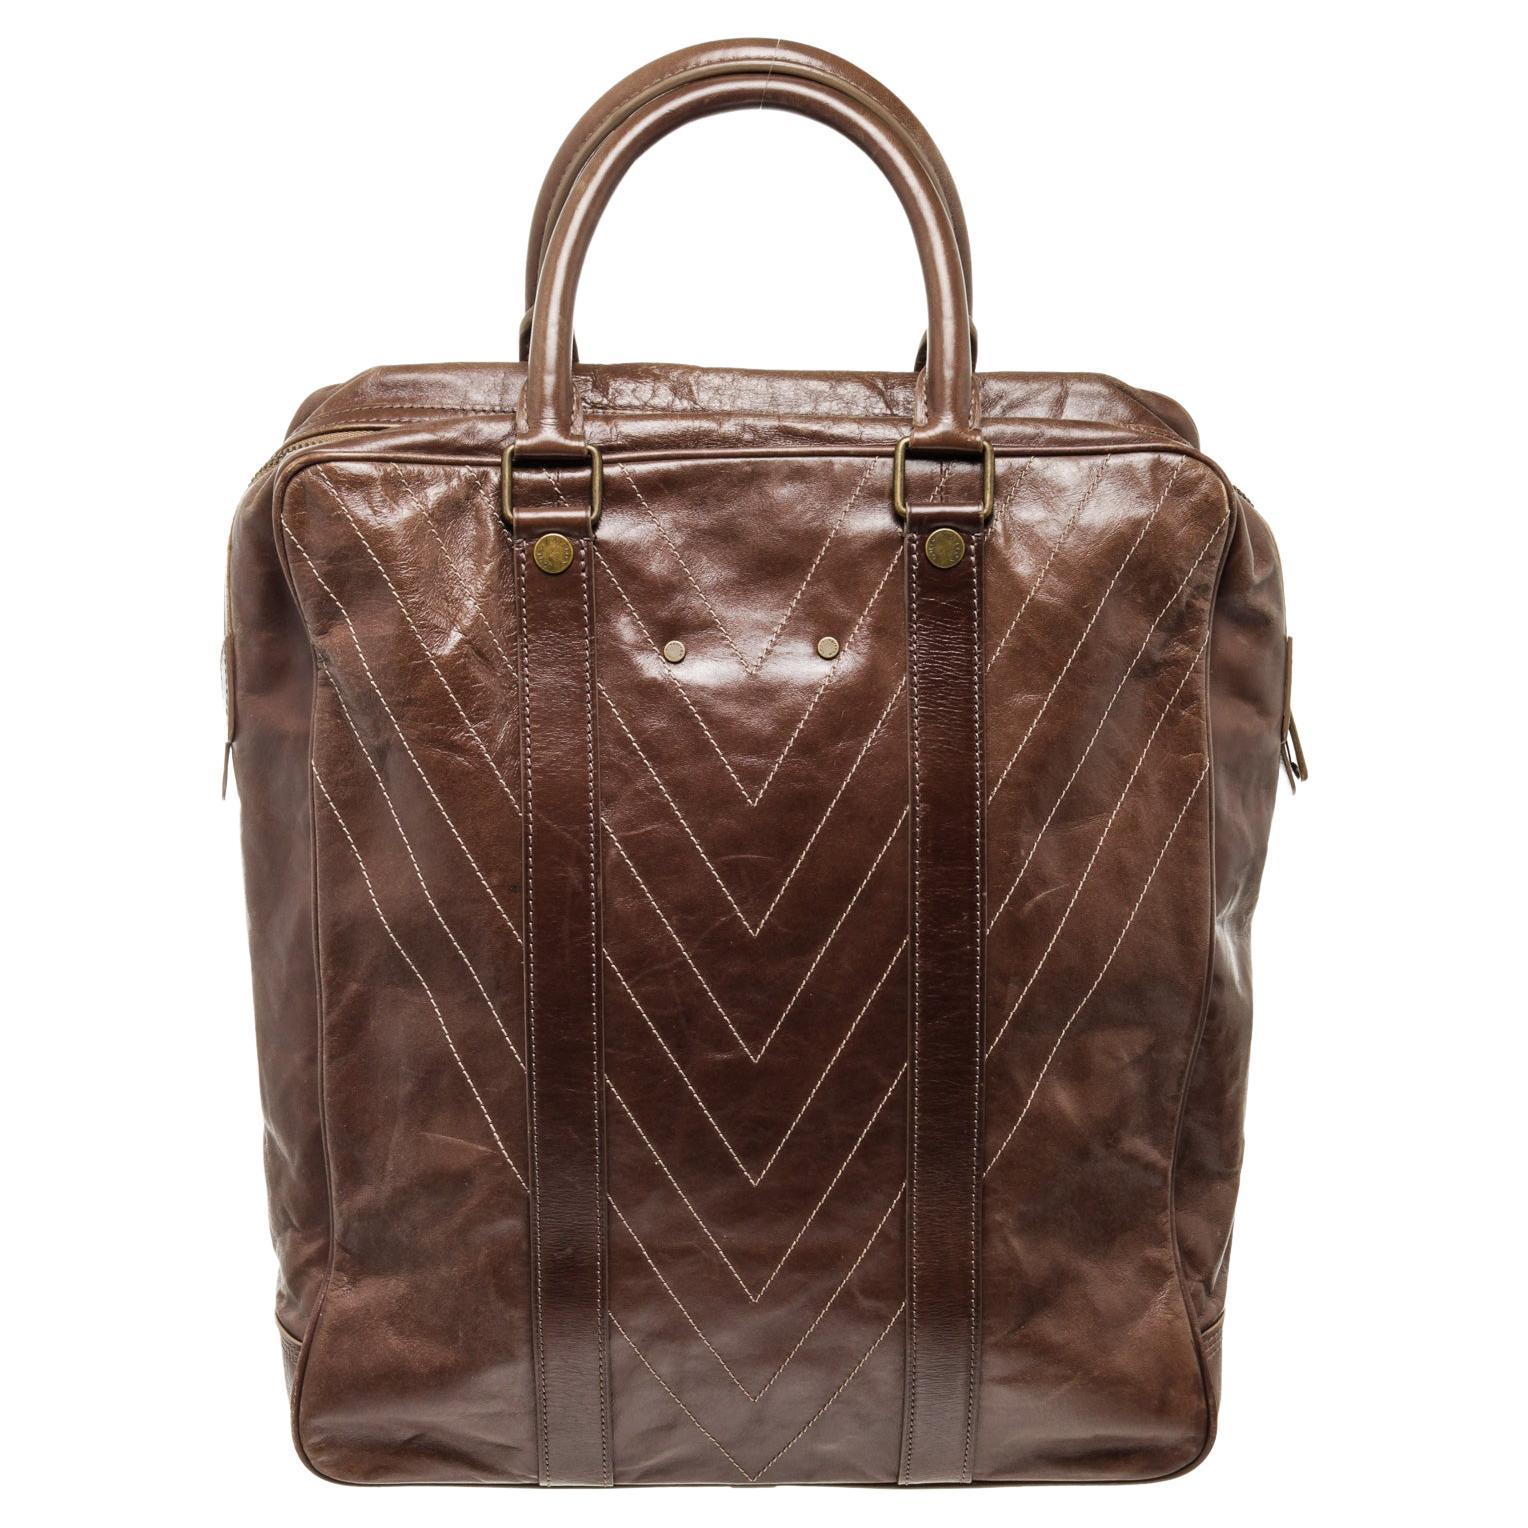 Louis Vuitton Brown Leather Soana Cabas Tote Bag For Sale